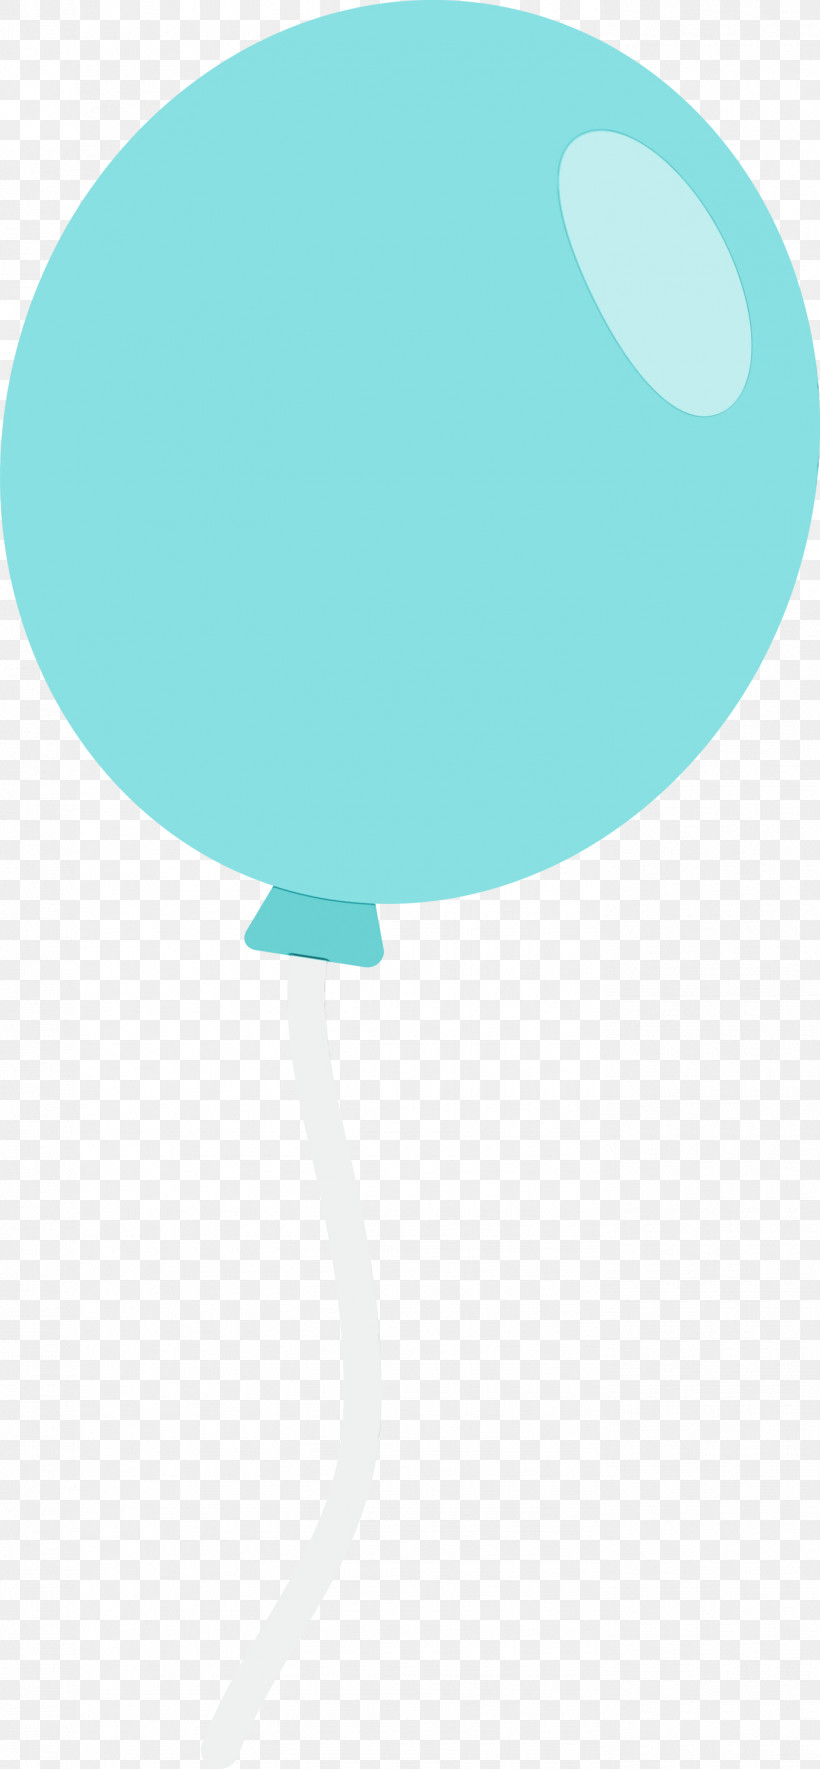 Turquoise Aqua Teal Turquoise Balloon, PNG, 1390x3000px, Balloon, Aqua, Paint, Teal, Turquoise Download Free